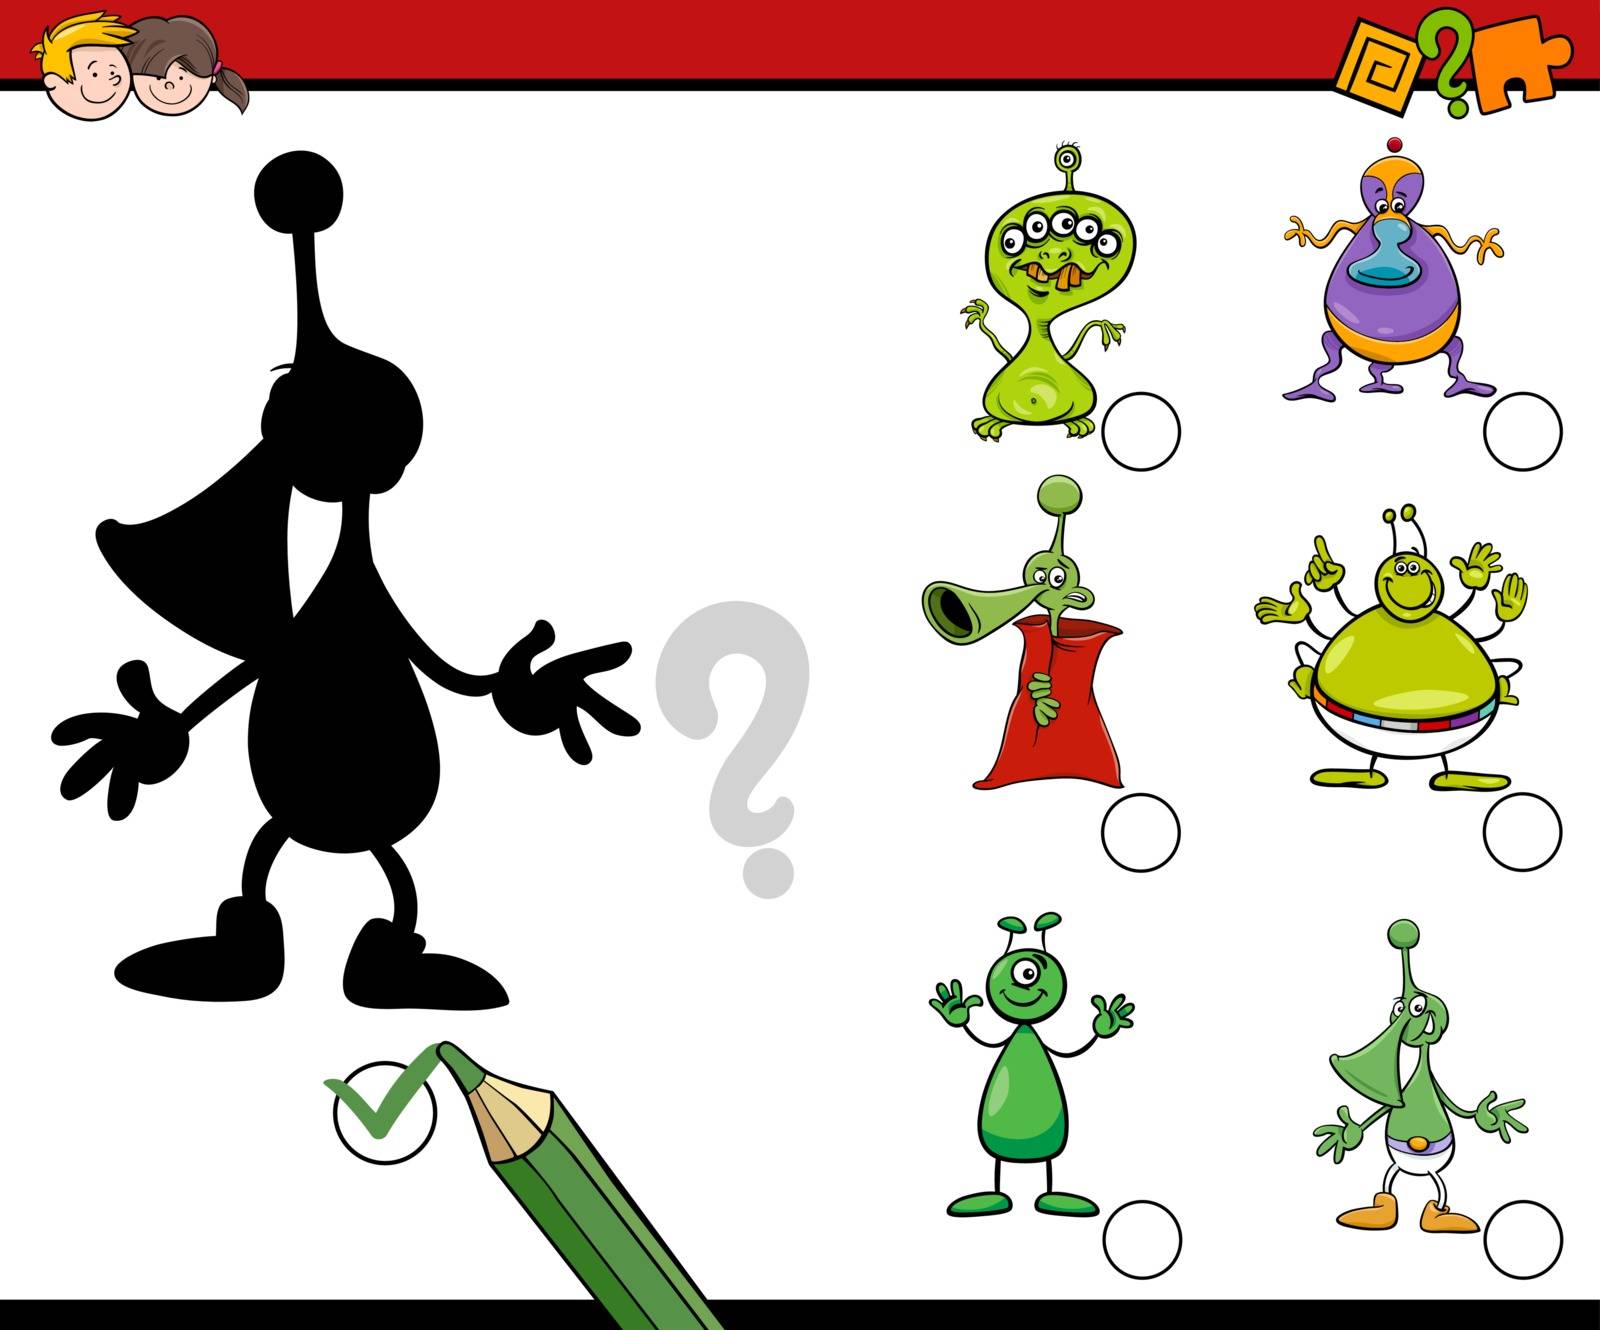 Cartoon Illustration of Find the Shadow Educational Activity for Preschool Children with Funny Alien Characters